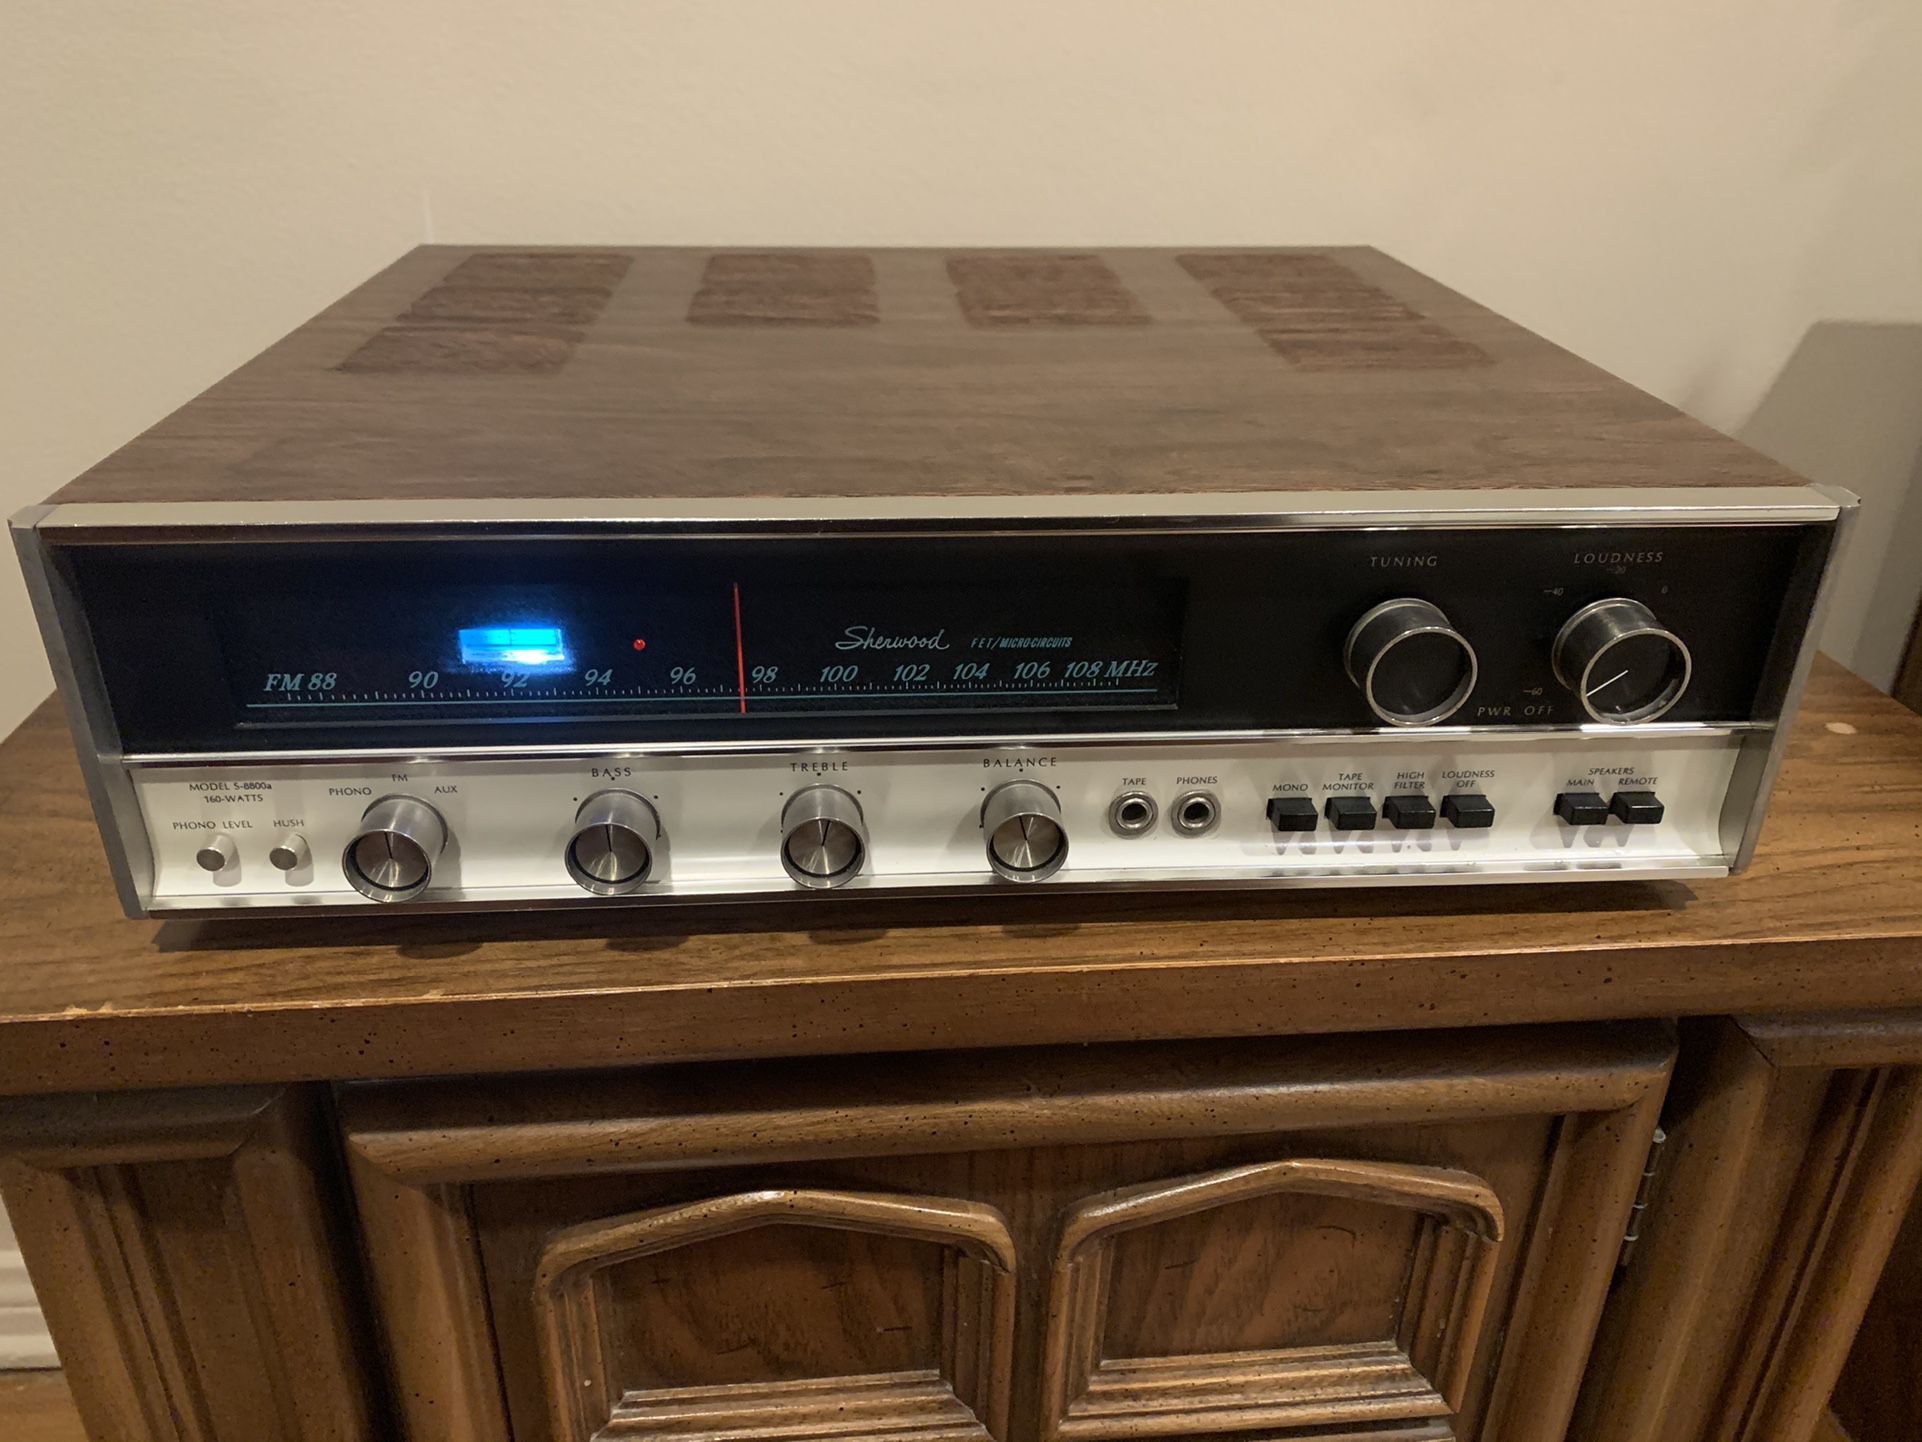 Vintage Sherwood S-8800a Stereo Receiver - 40 watts per channel- Tested & Working